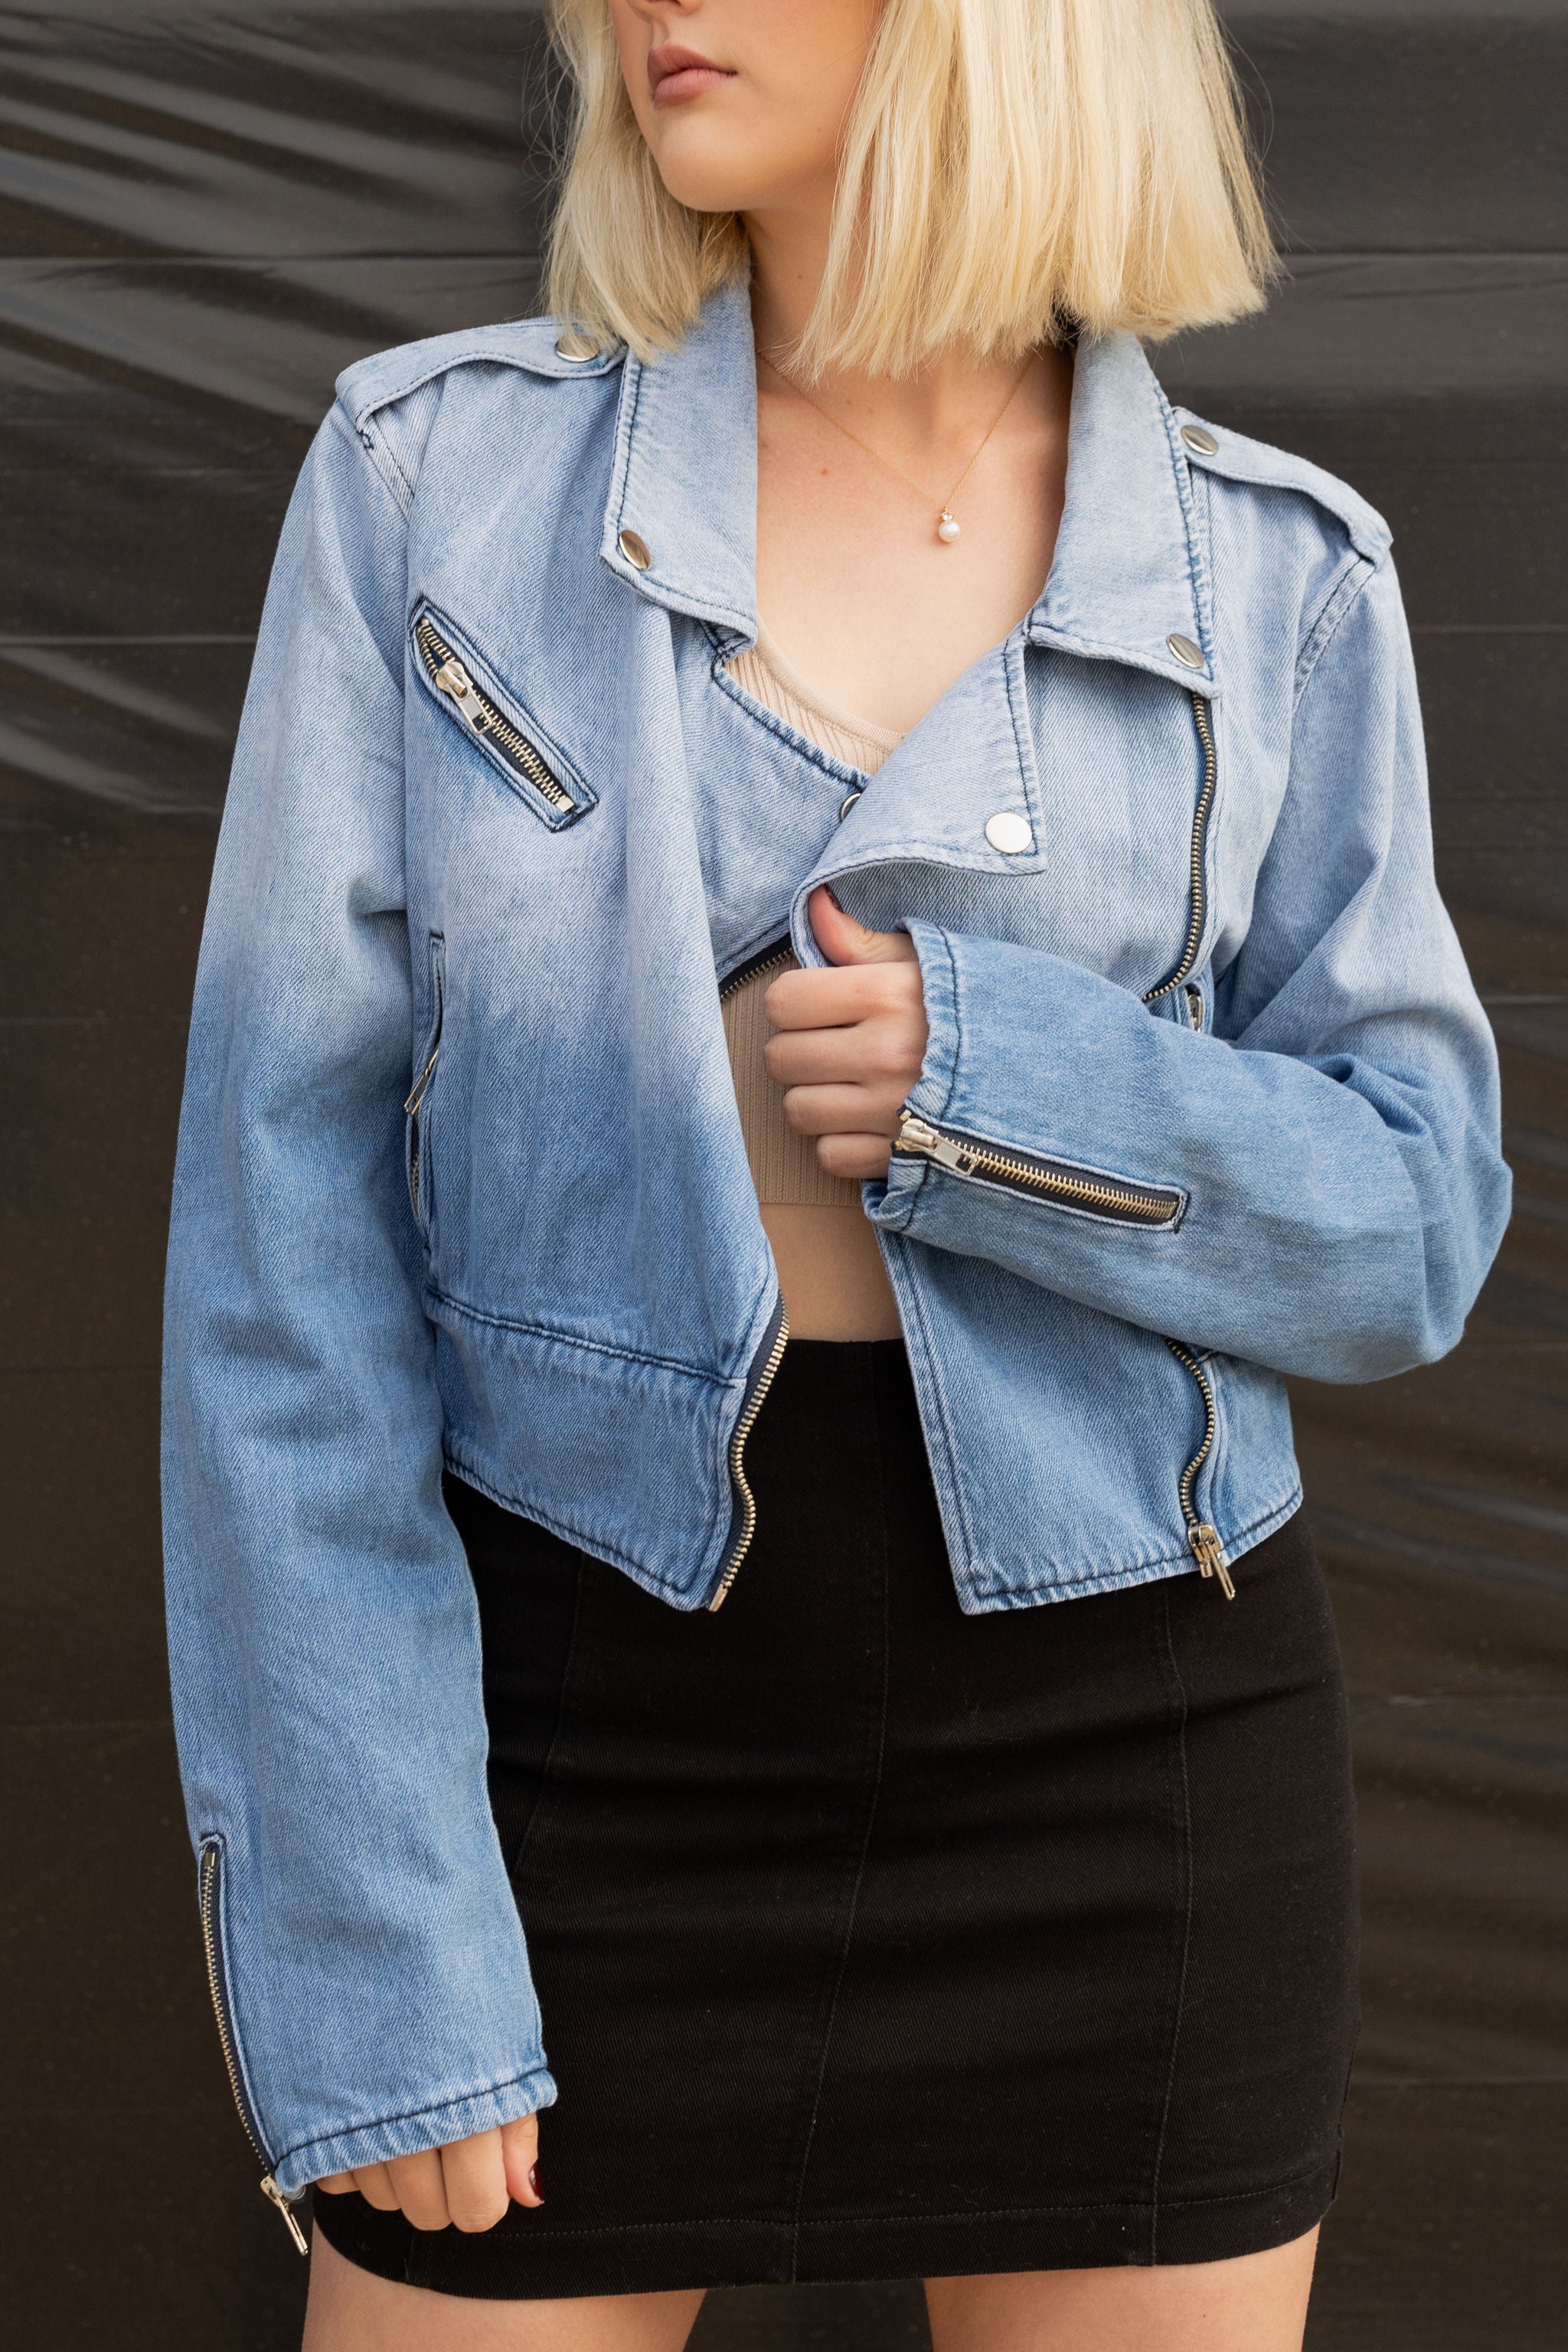 Leave Now Denim Jacket by For Good